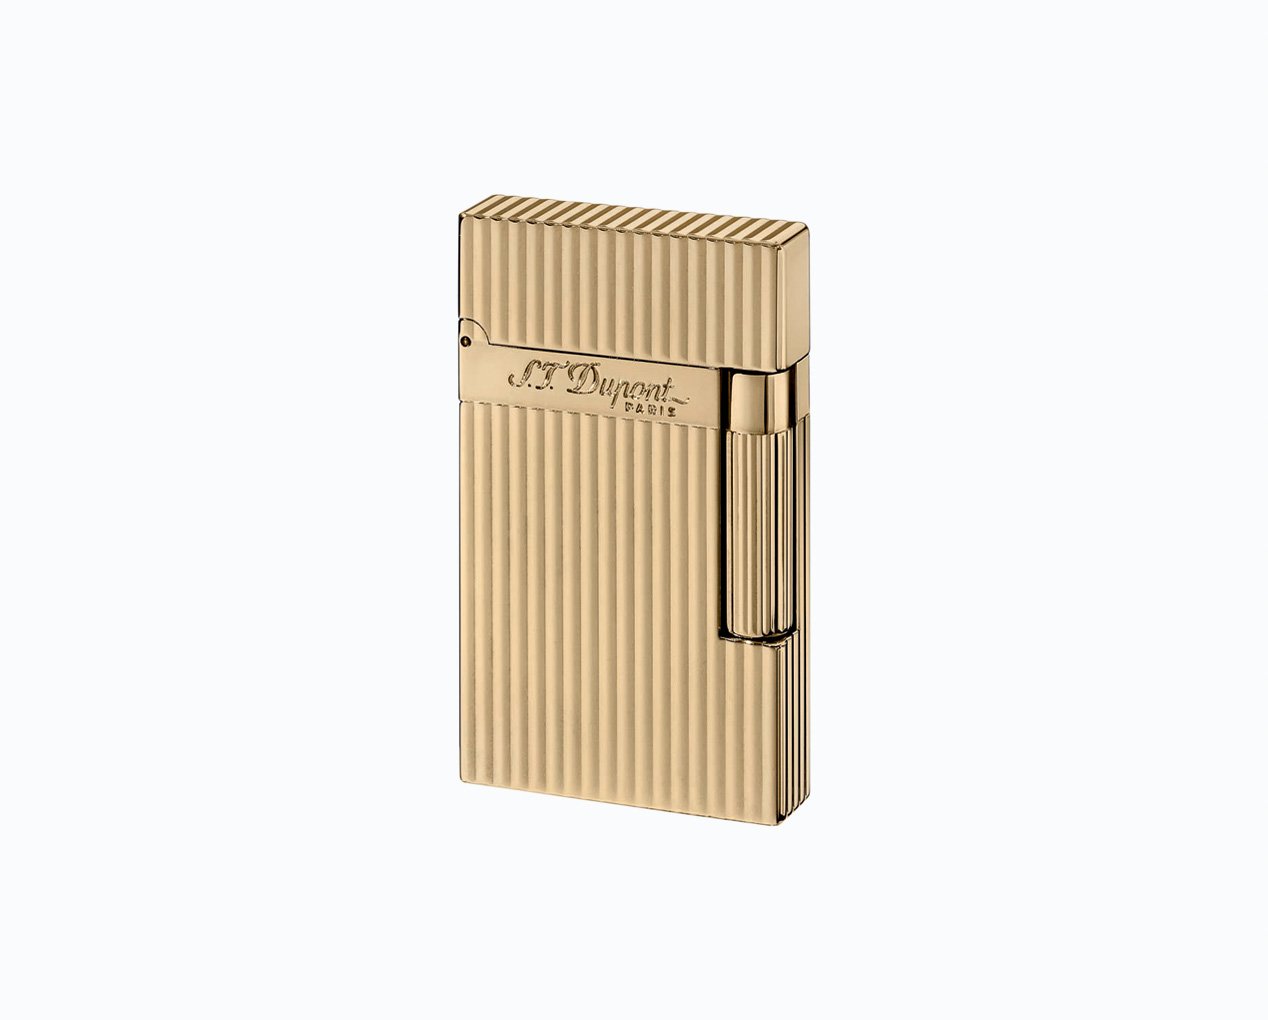 Lighter with yellow gold finish - Luxury lighter | S.T. Dupont